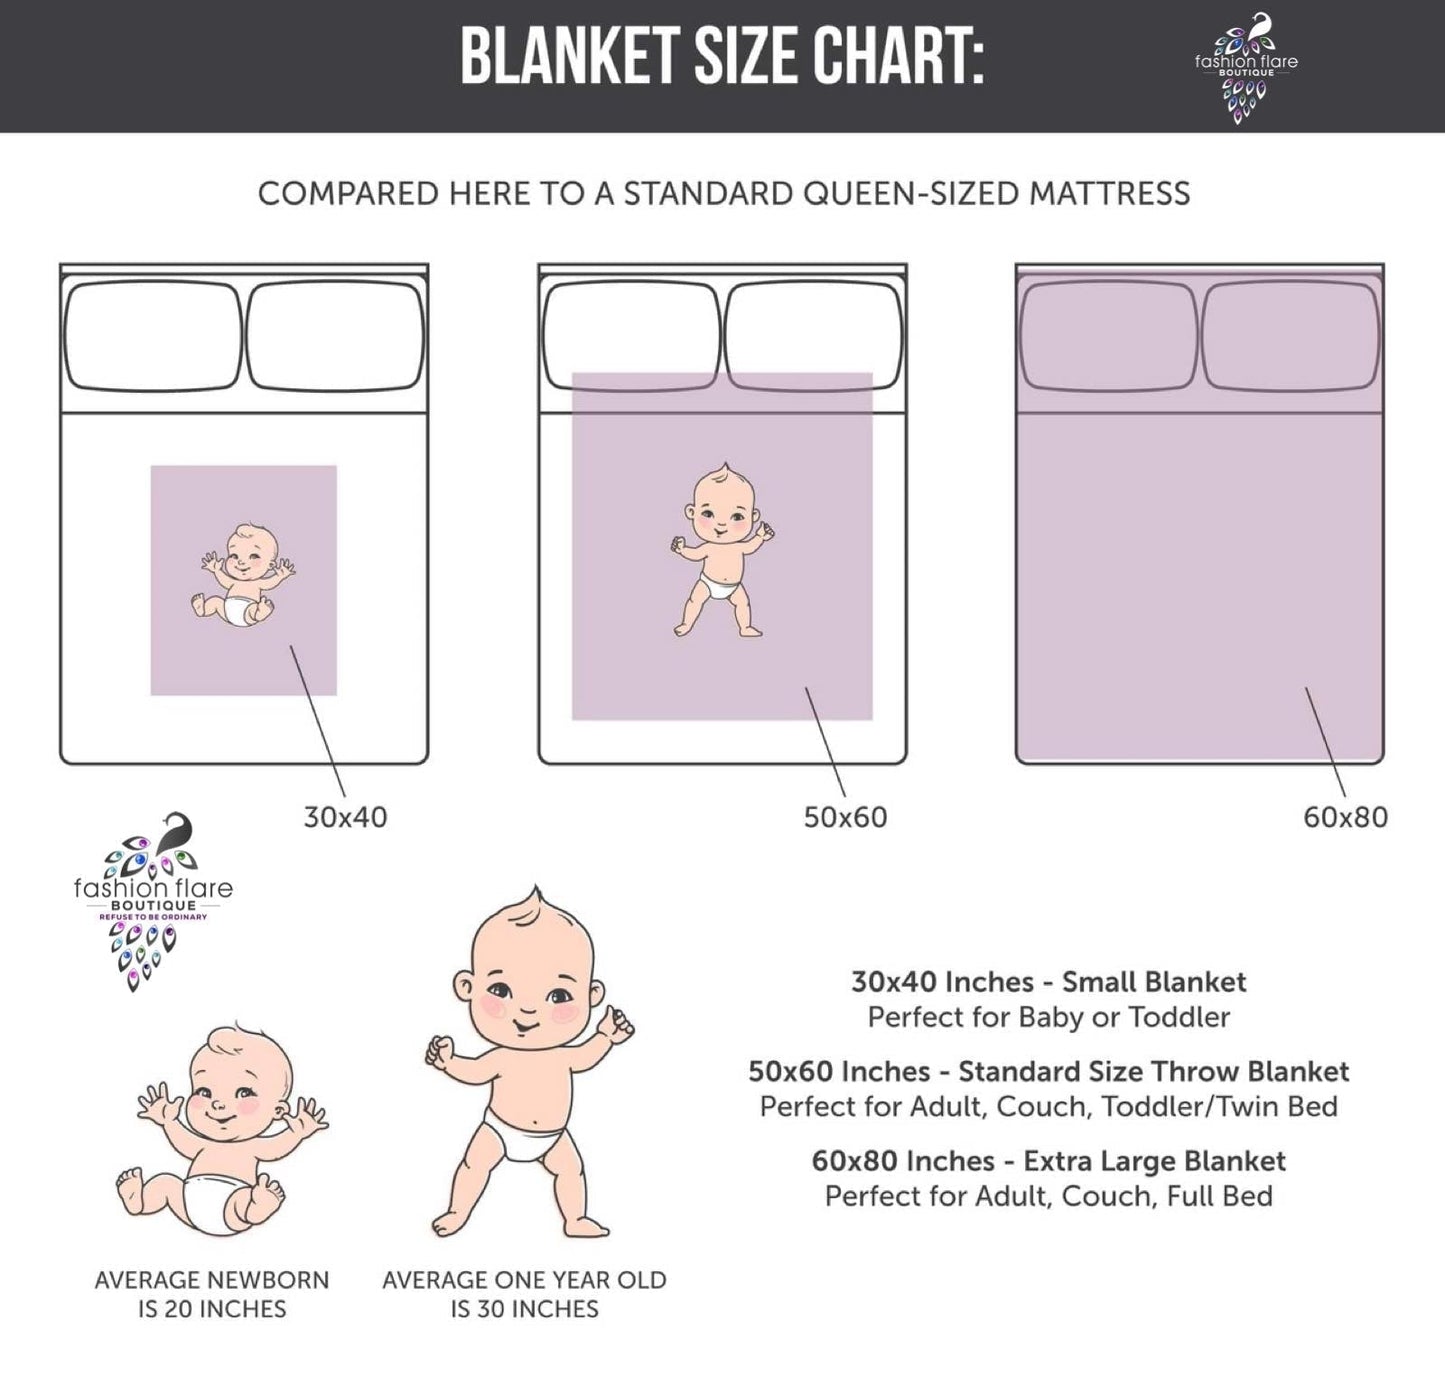 Custom Personalized Plush Minky Blanket - Pink & Gray Watercolor Floral Quilt Style // 3 sizes